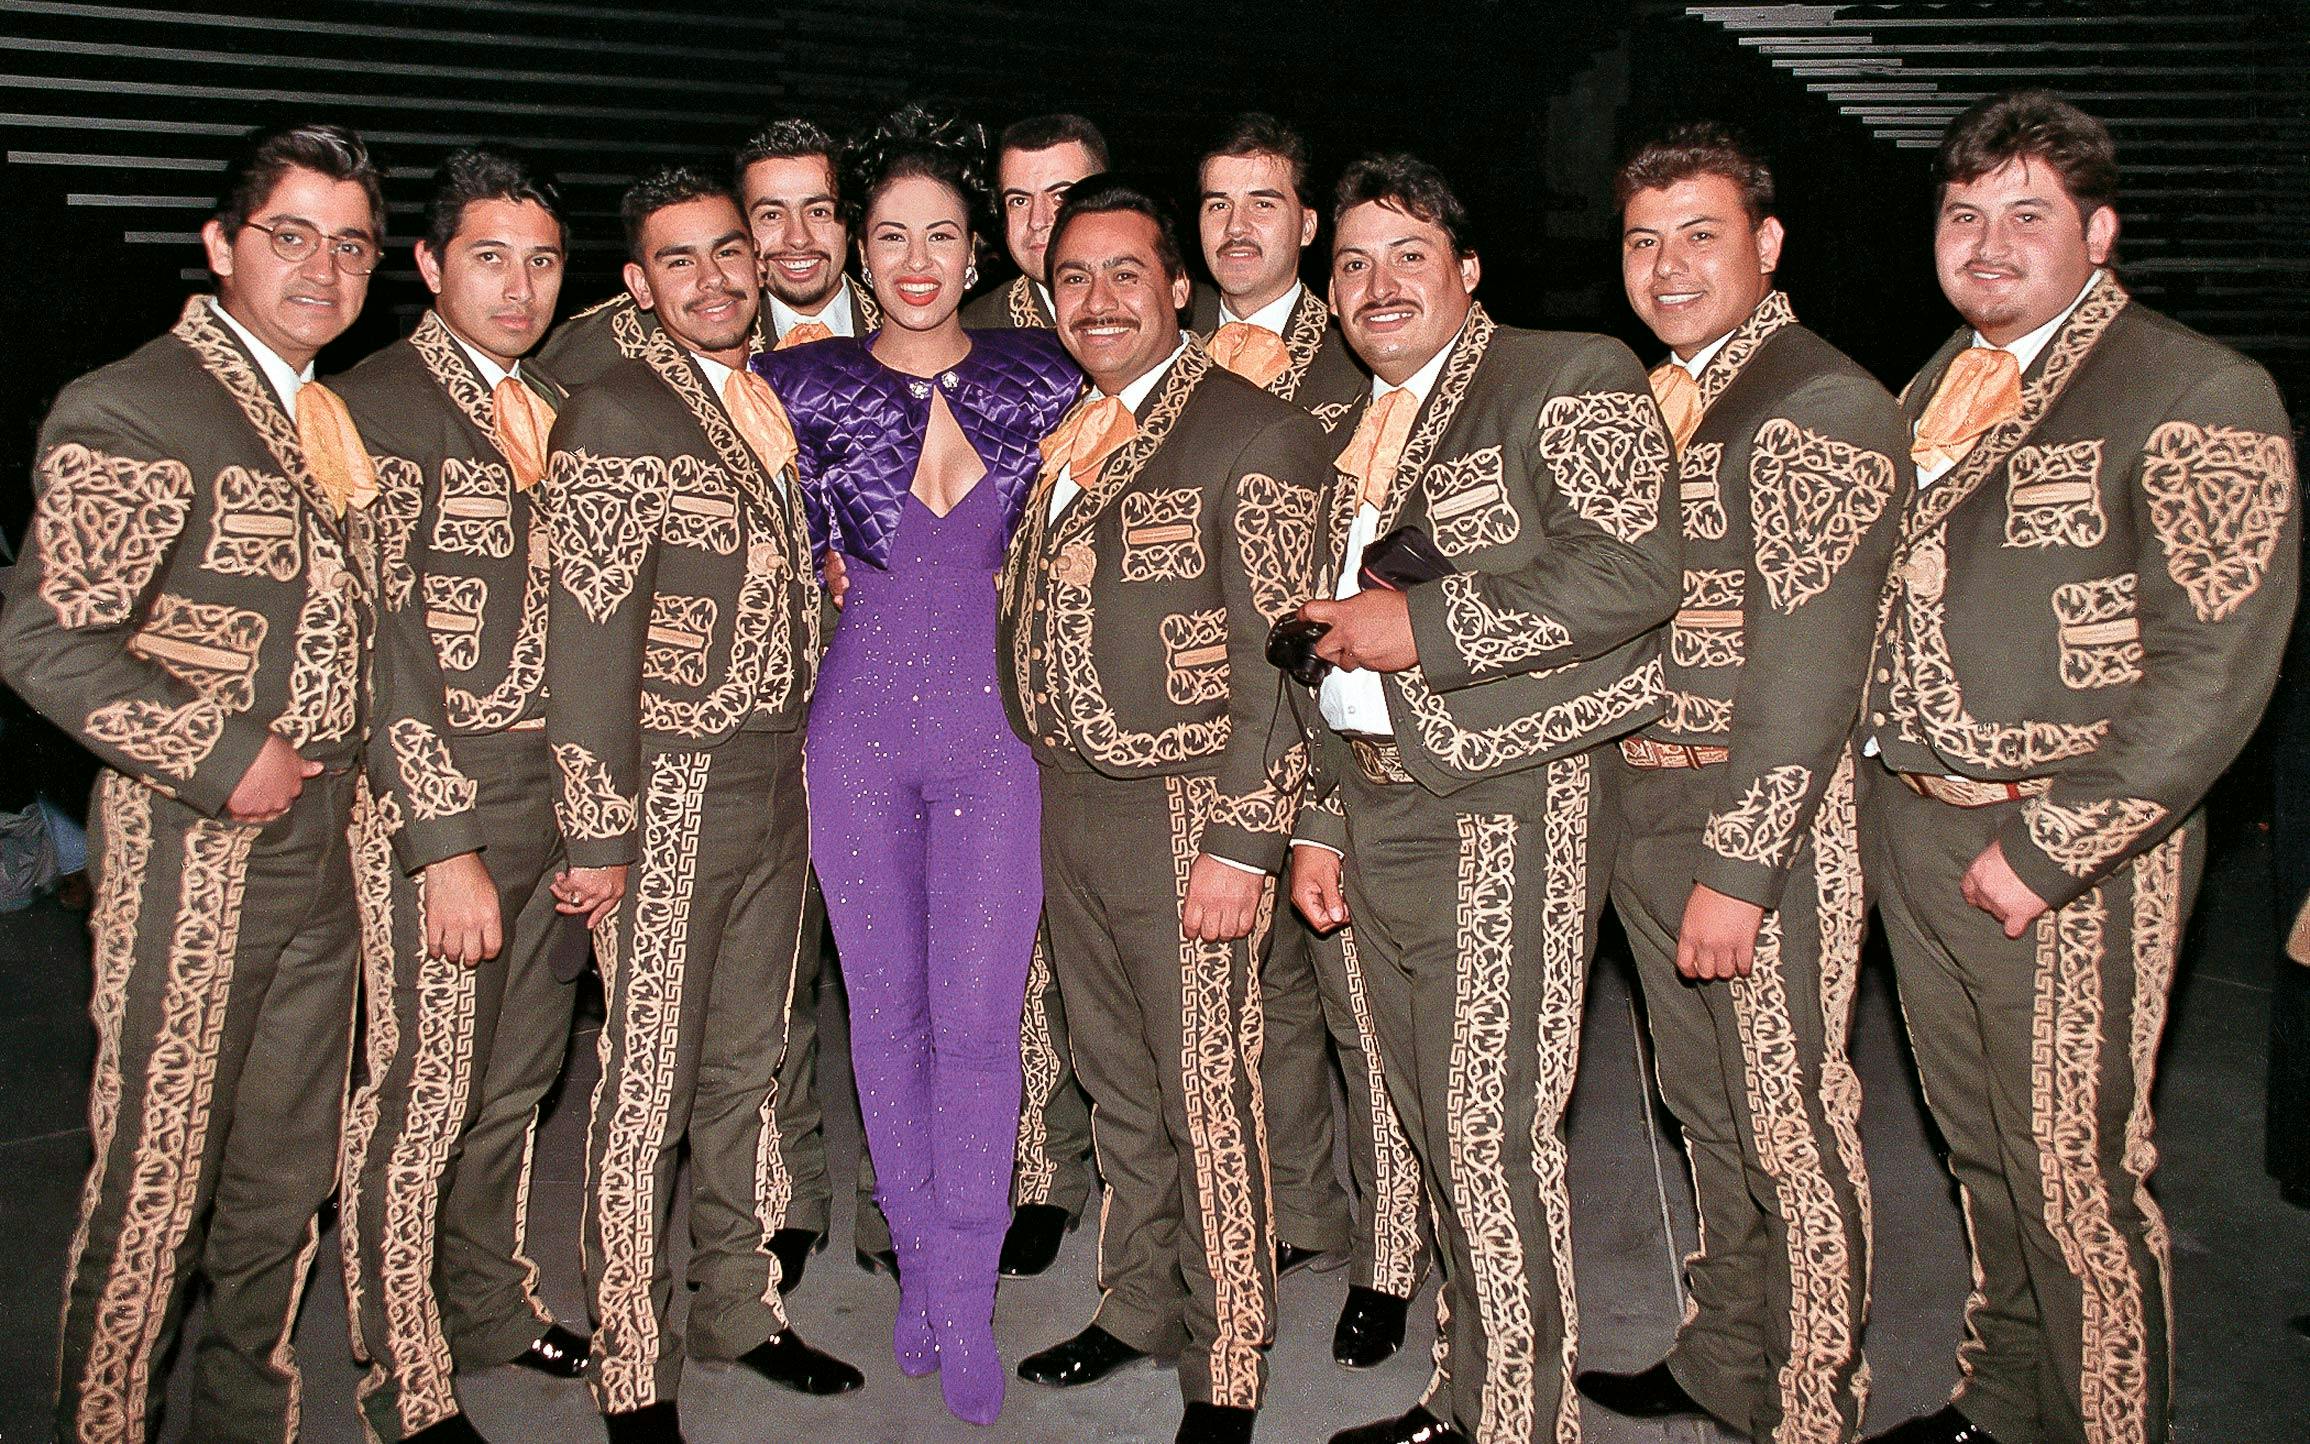 Selena, in a purple jumpsuit and quilted bolero jacket, with the mariachi Los Caporales, at the Tejano Music Awards in San Antonio, on February 11, 1995